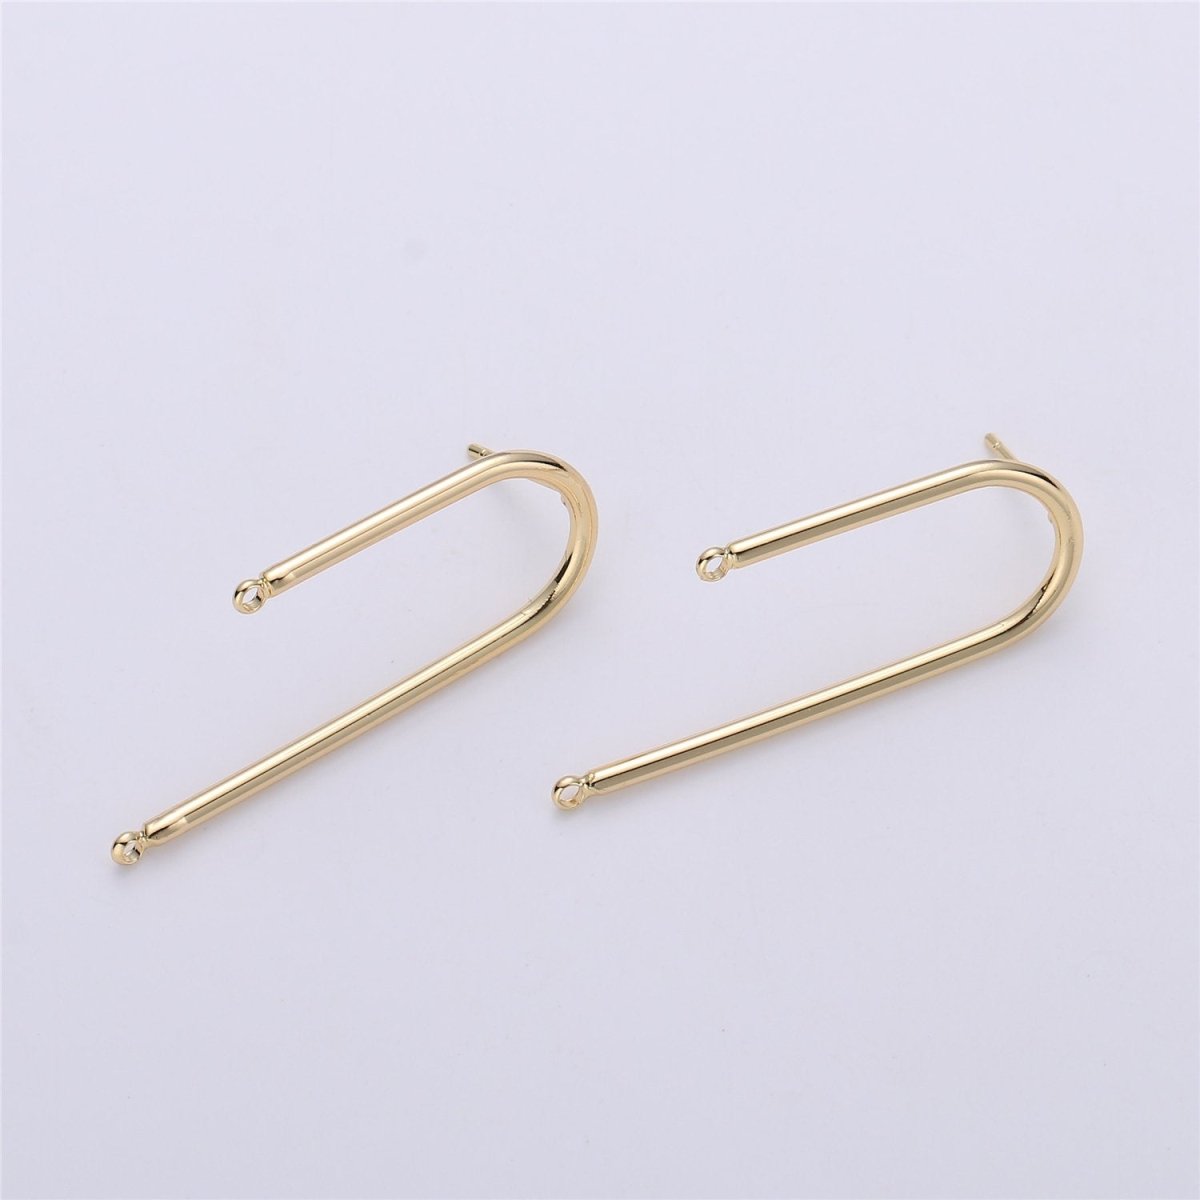 Gold Rectangular Post Earring, Geometric Earrings with Open Link for DIY Earring Jewelry Making Gold Filled K-252 - DLUXCA